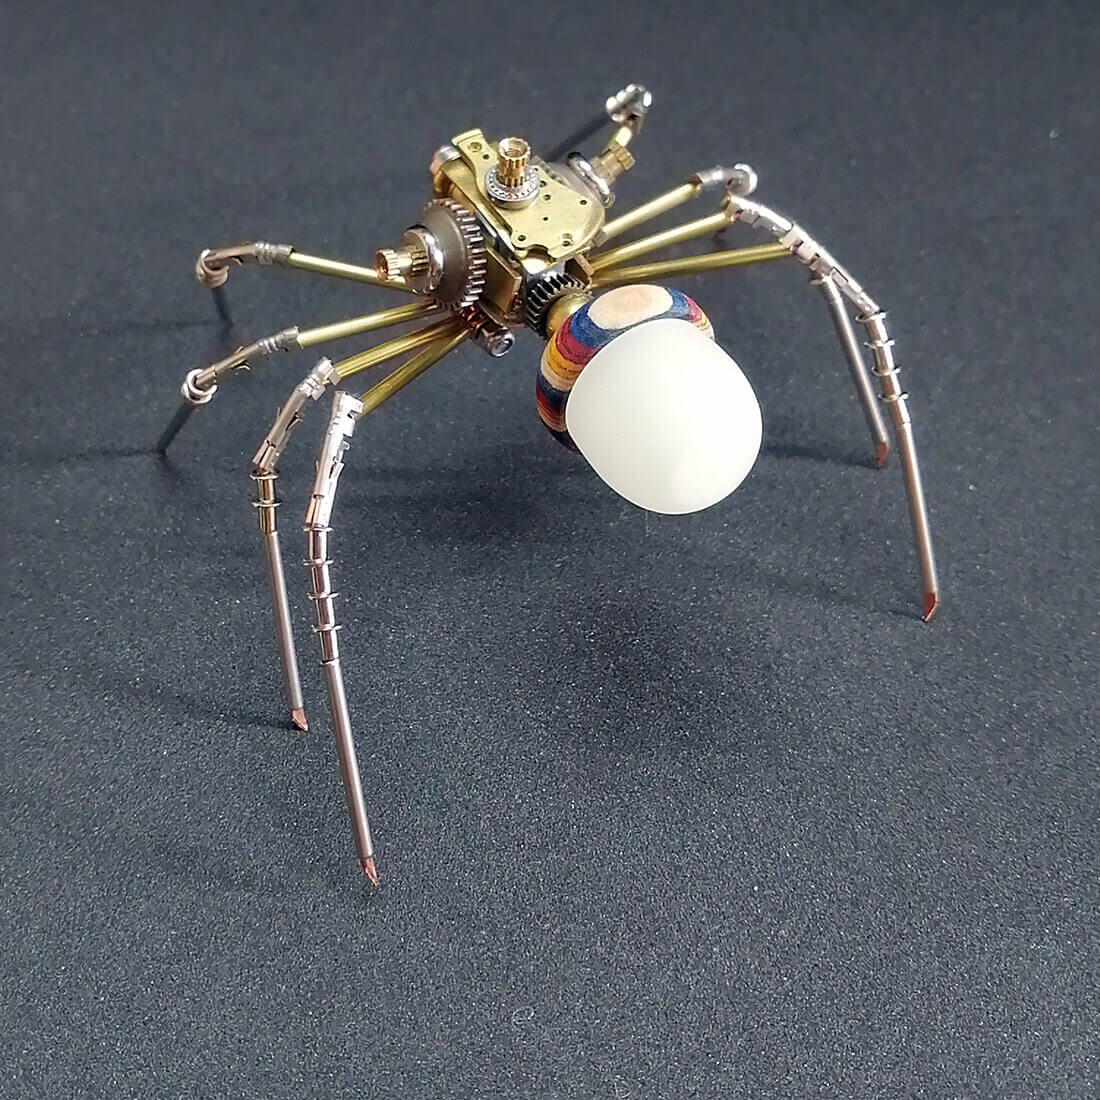 122PCS DIY Steampunk Metal Spider Puzzle Toy with Nut Light